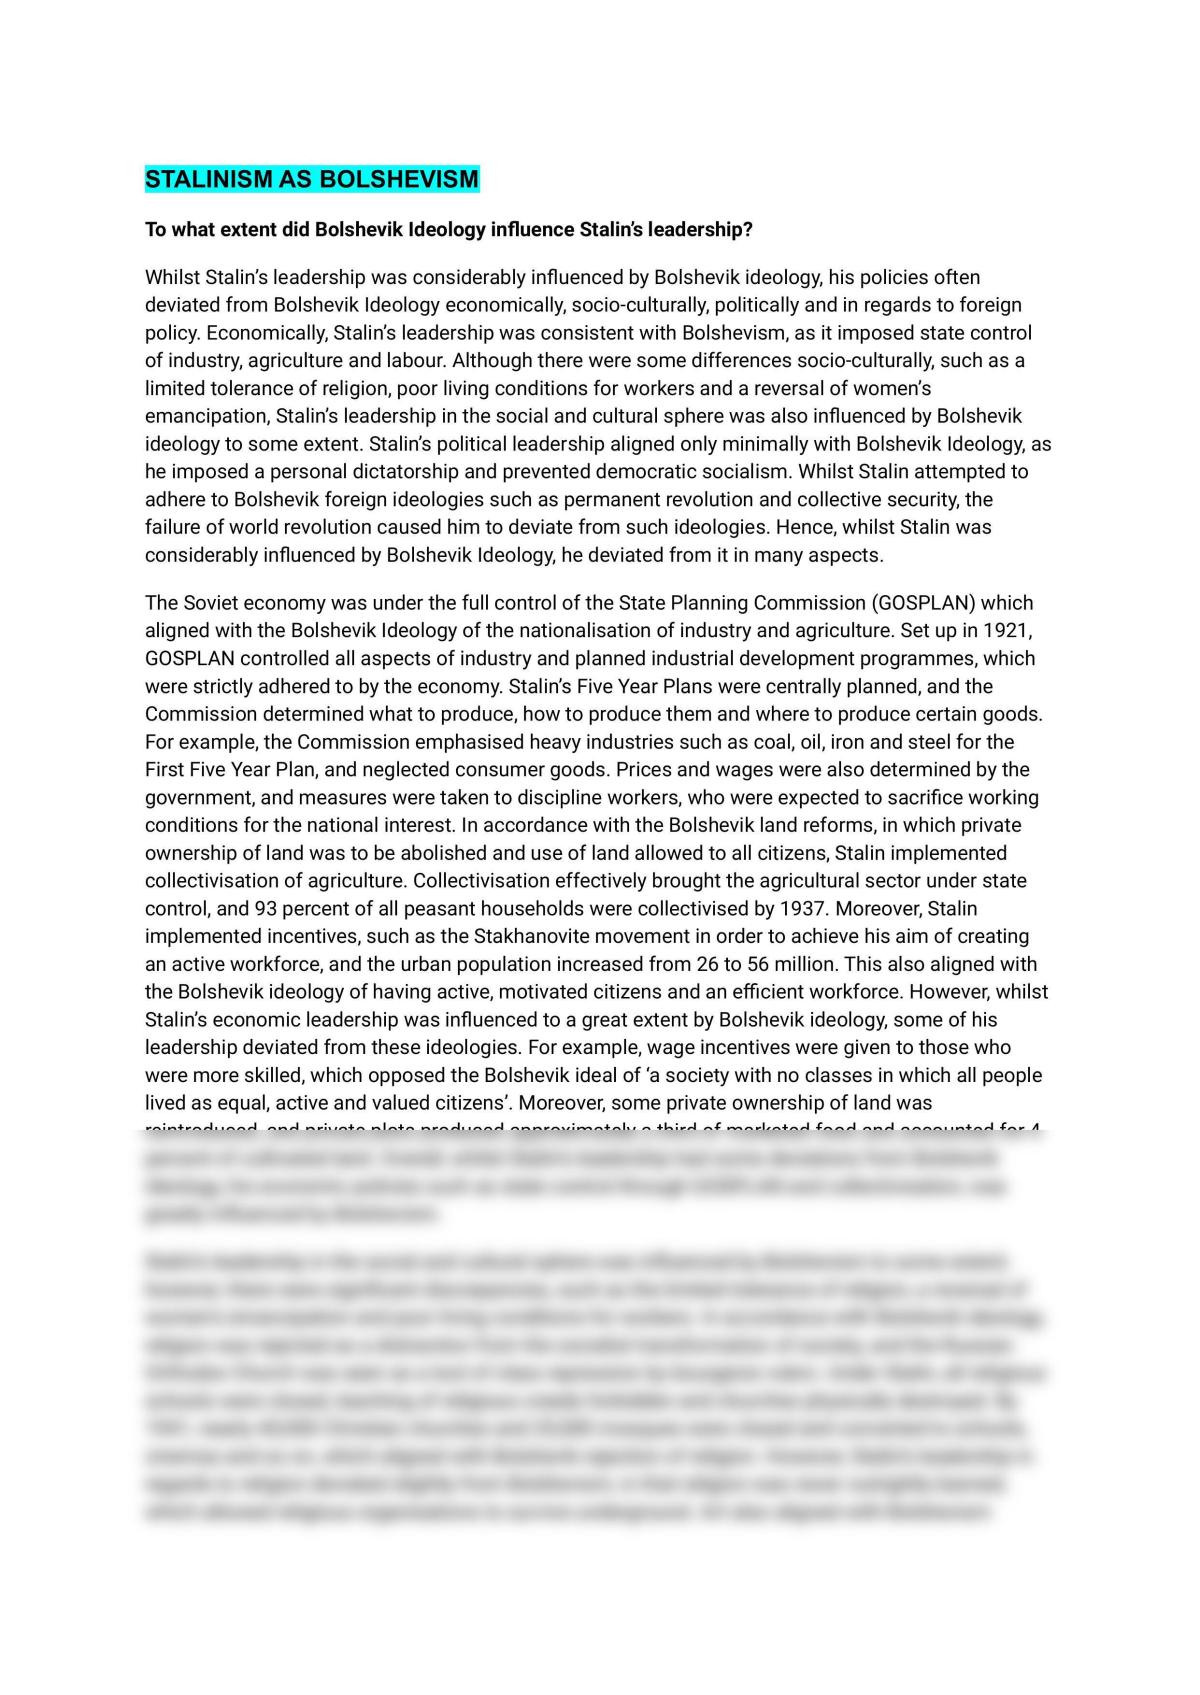 Stalinism as Bolshevism Essay - Page 1